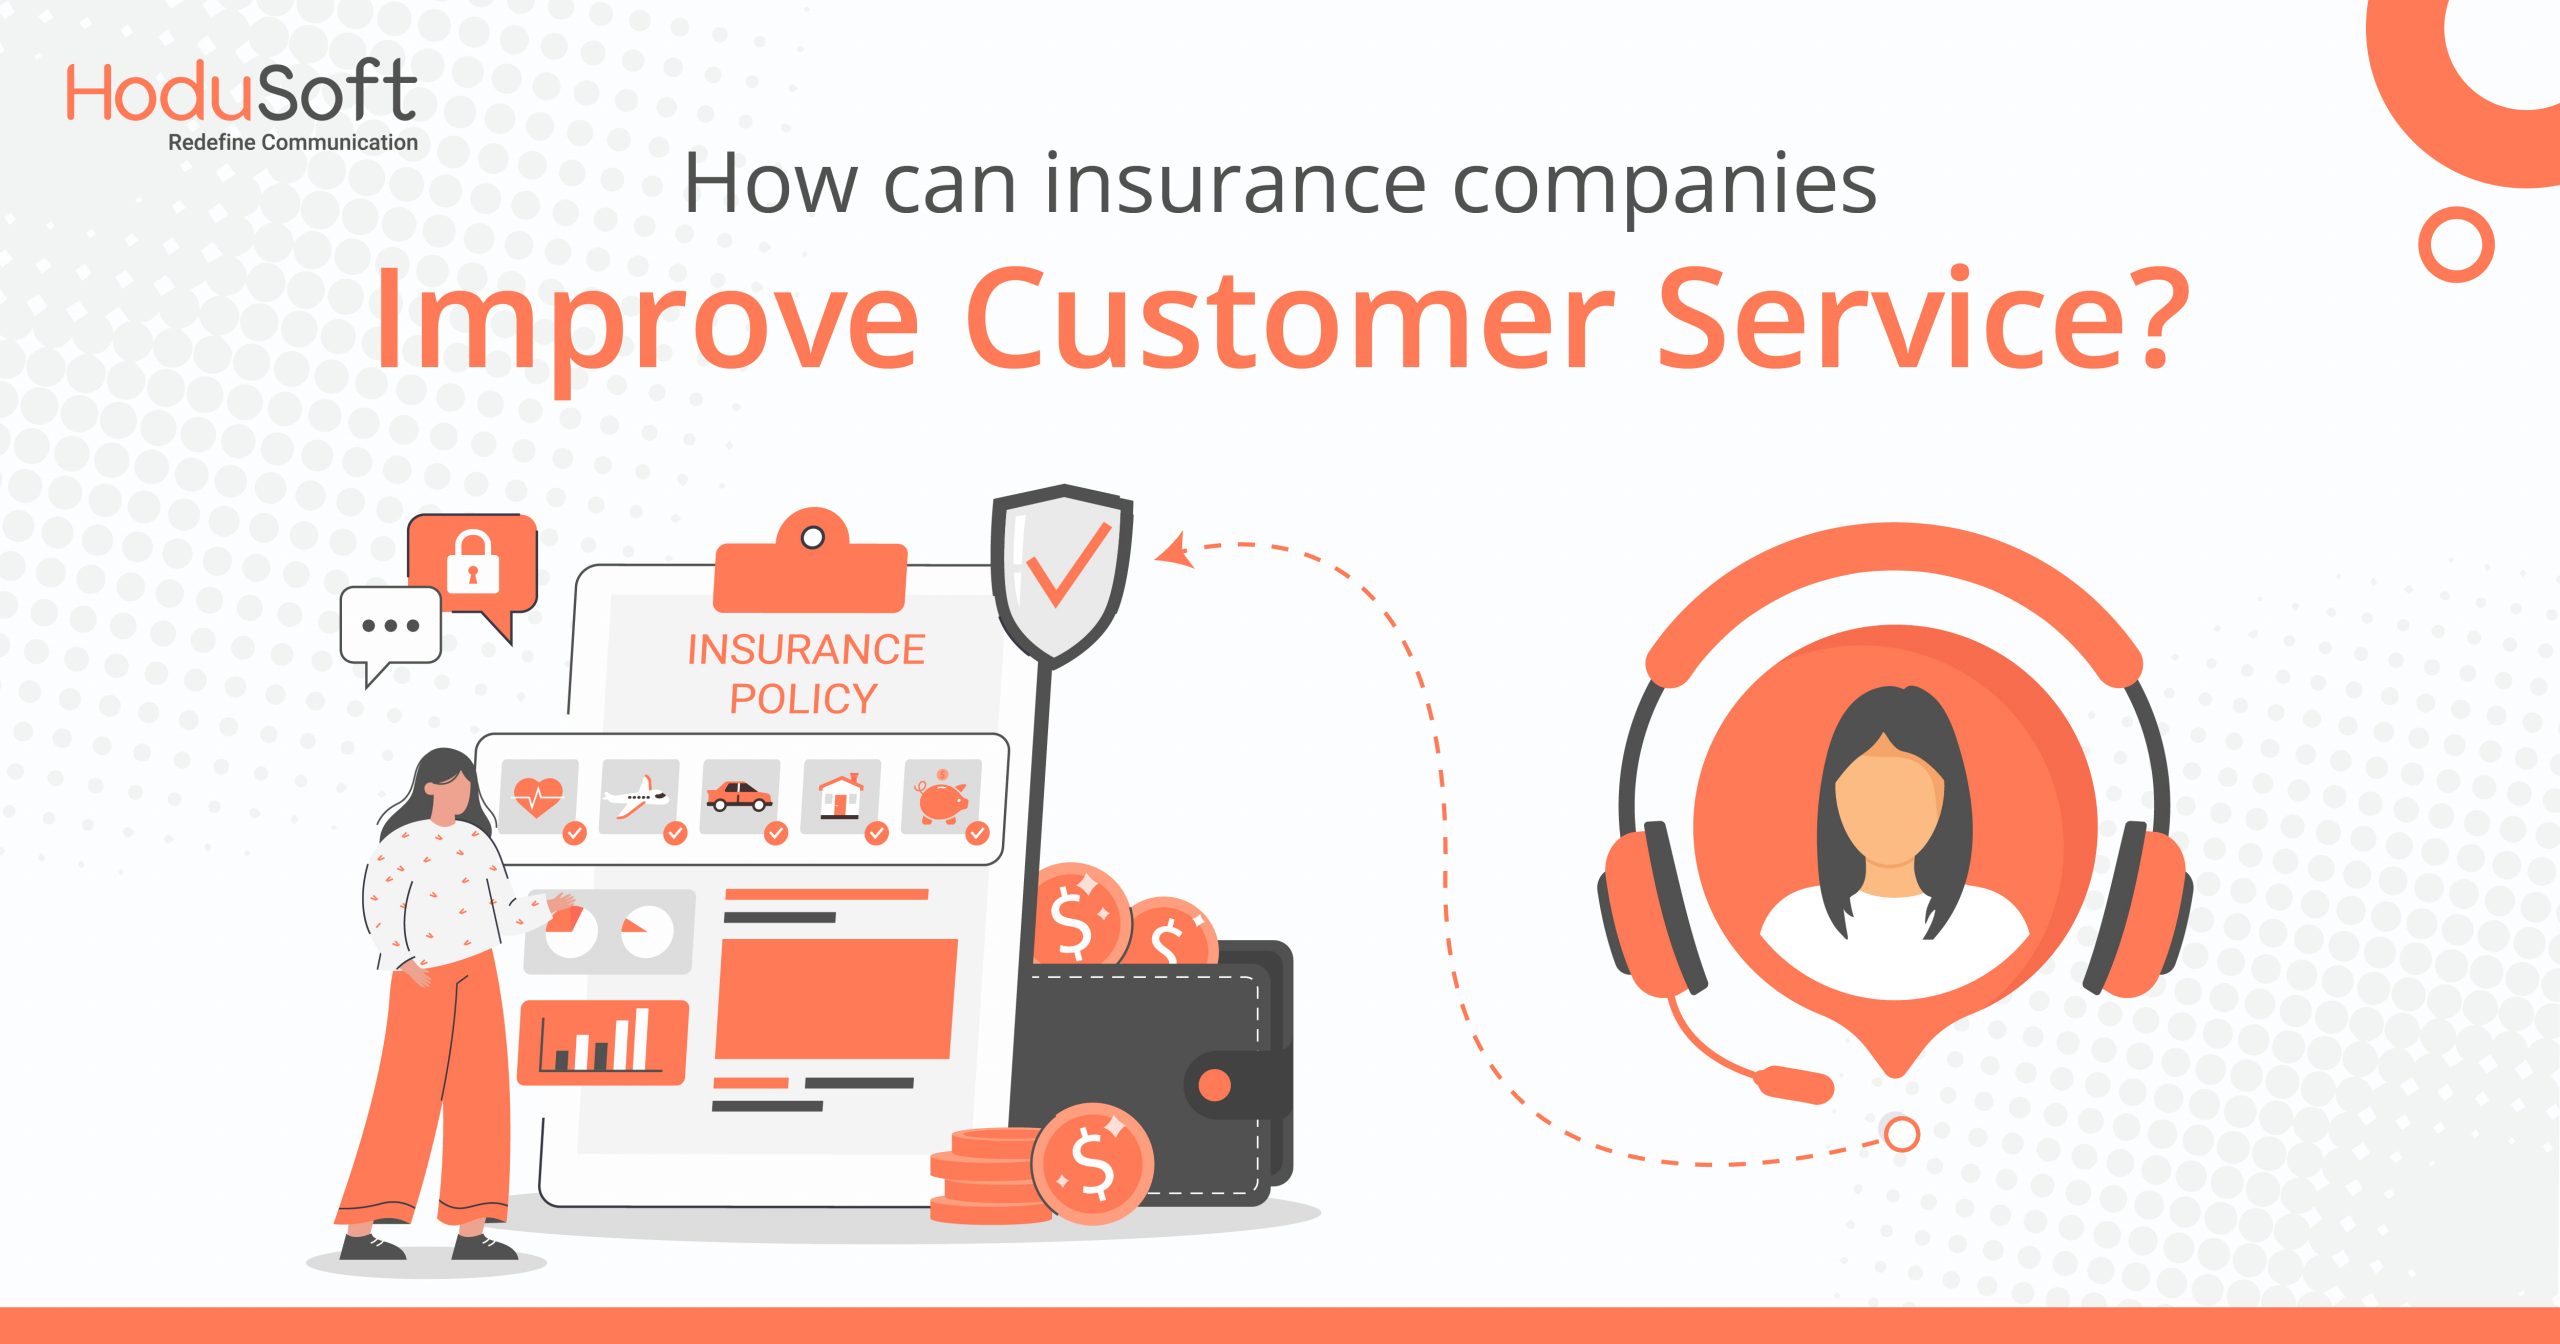 How can insurance companies improve customer service?